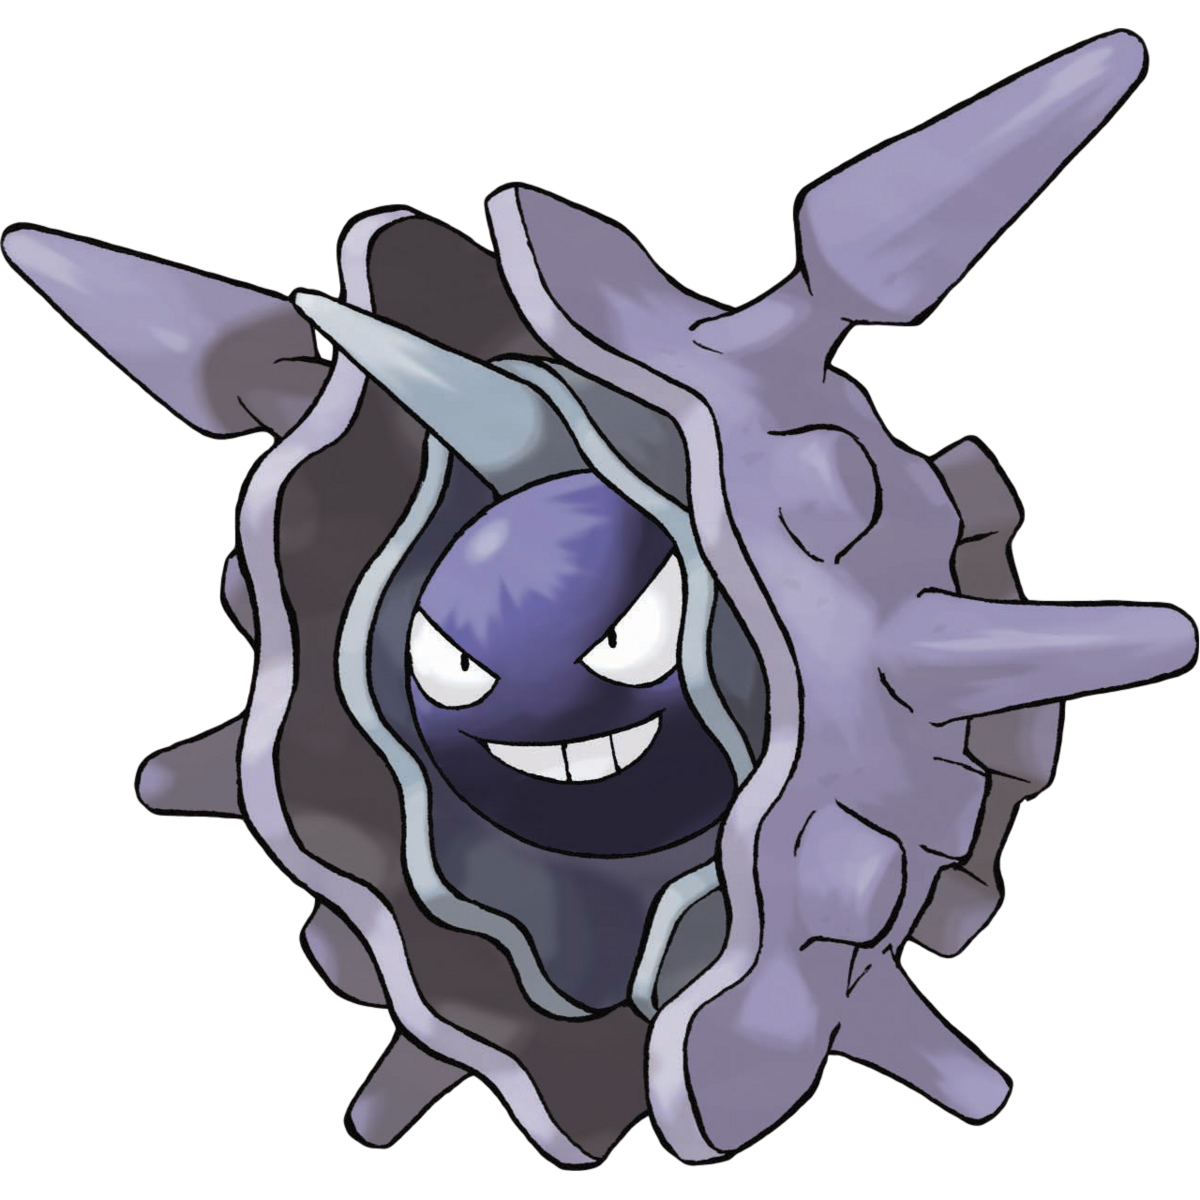 Cloyster (Almost Any Ability) - 1/26/2023